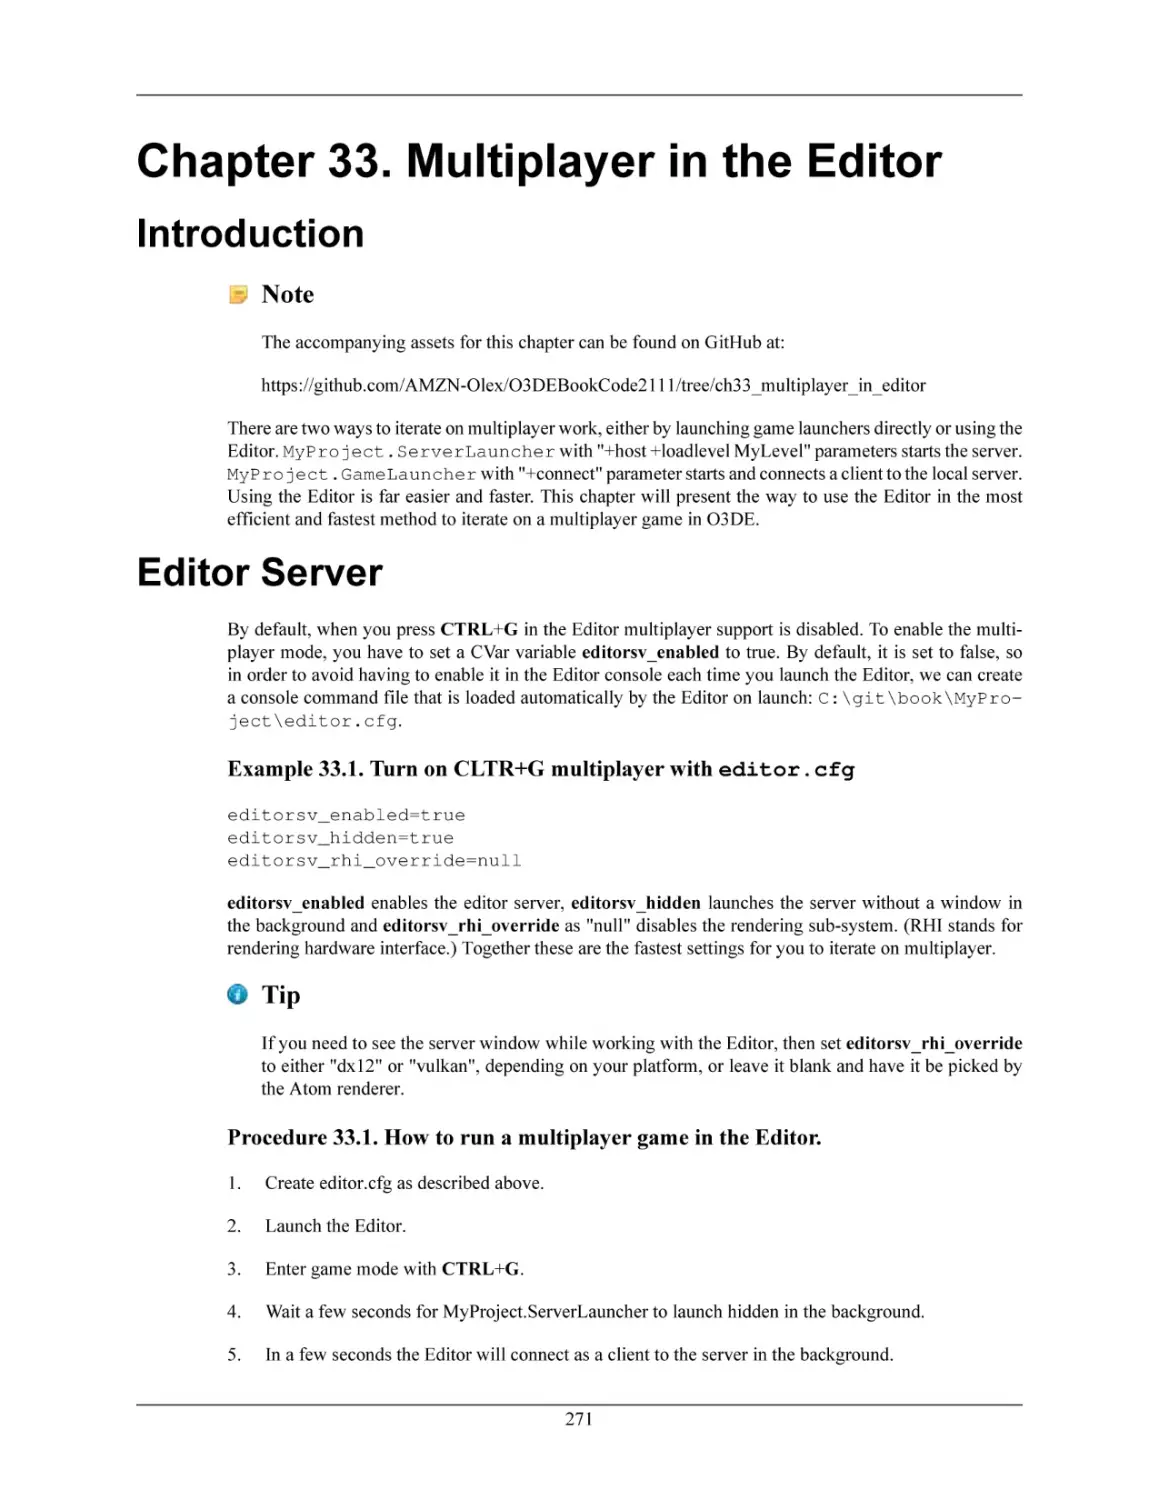 Chapter 33. Multiplayer in the Editor
Introduction
Editor Server